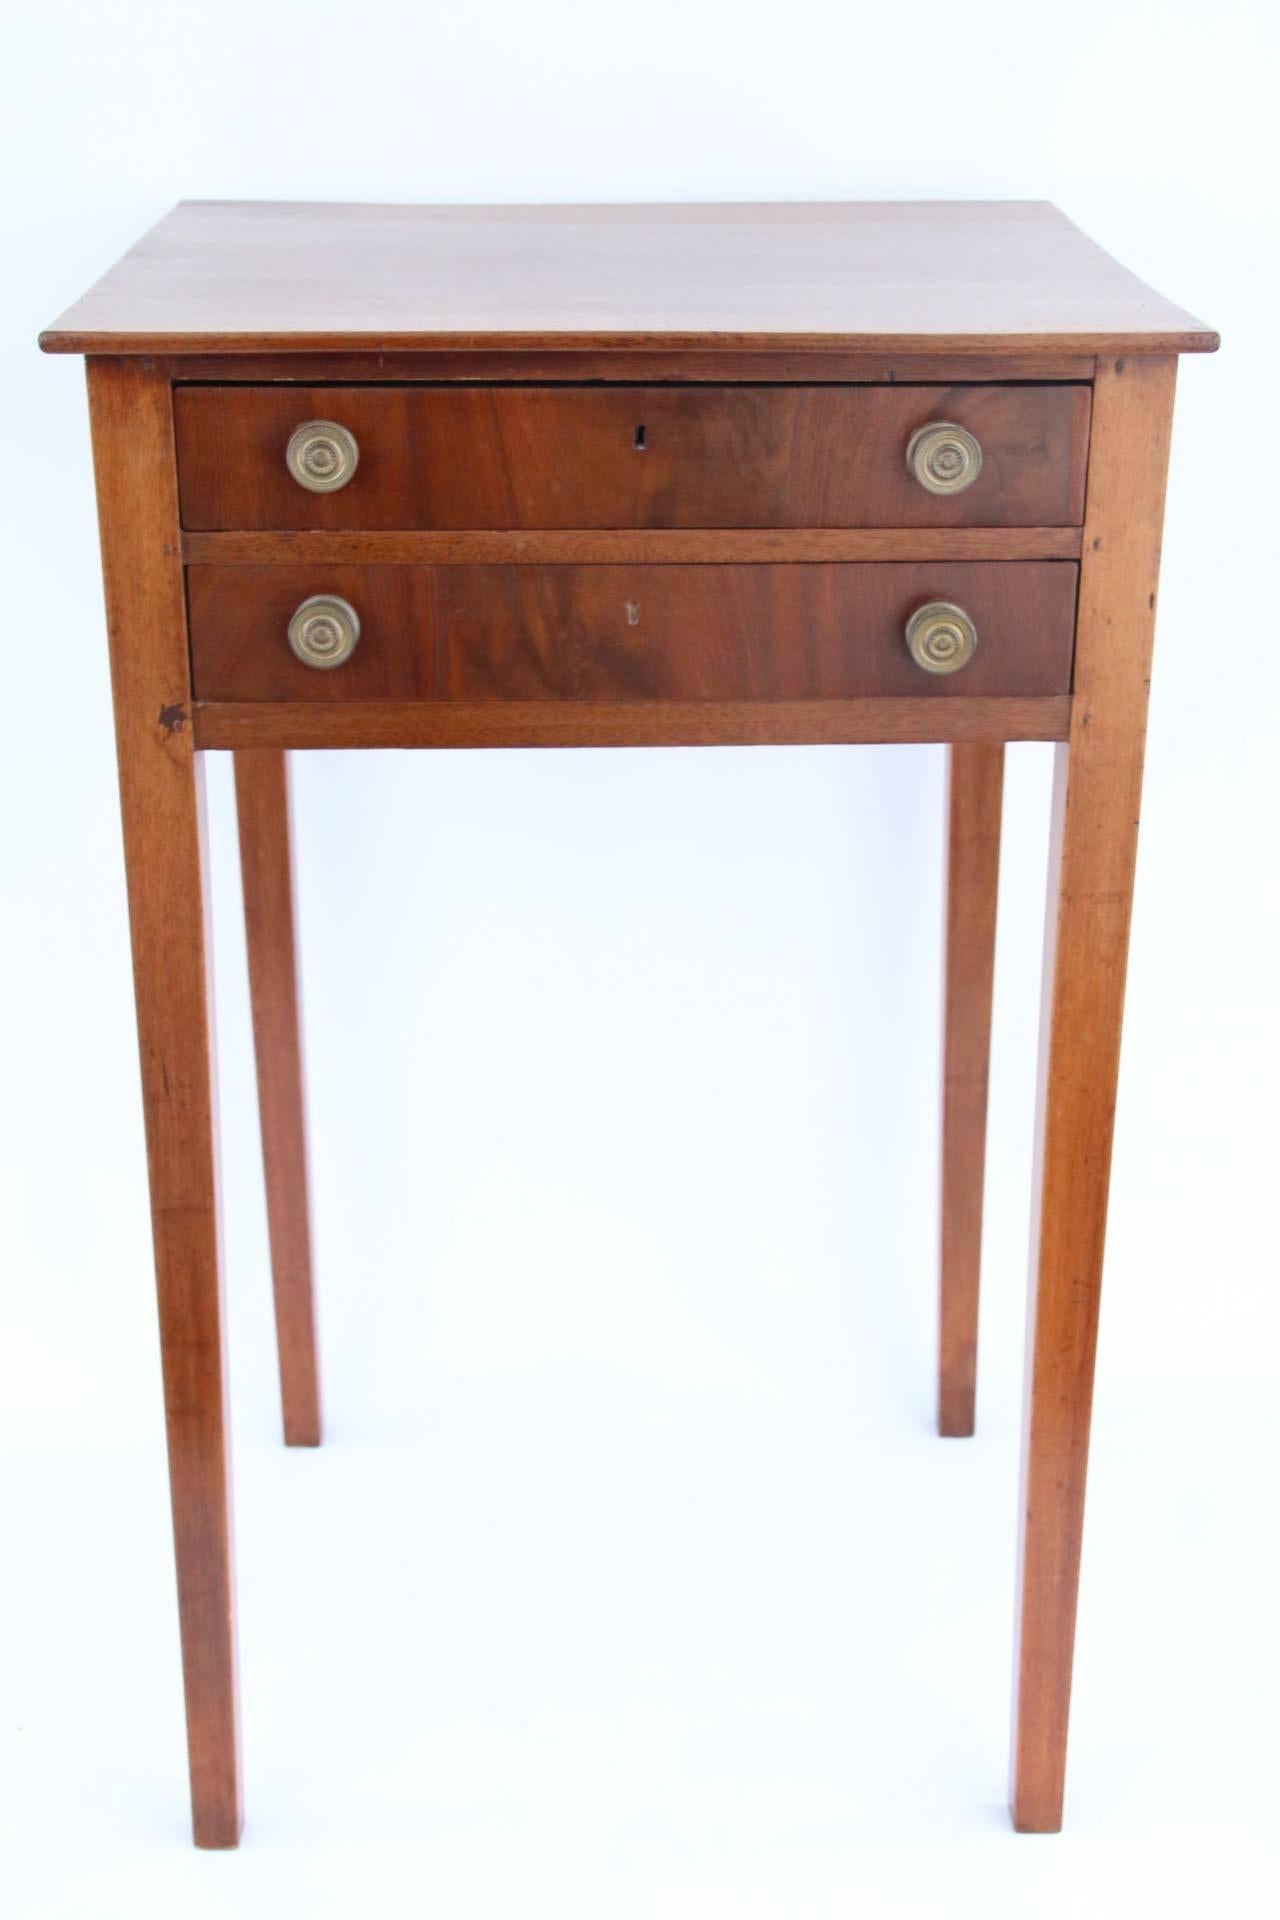 Hepplewhite mahogany two-drawer stand with delicate tapered legs and dovetail construction. Original brass pulls. Wonderful delicate size.

New England, circa 1810.

Measures: 29